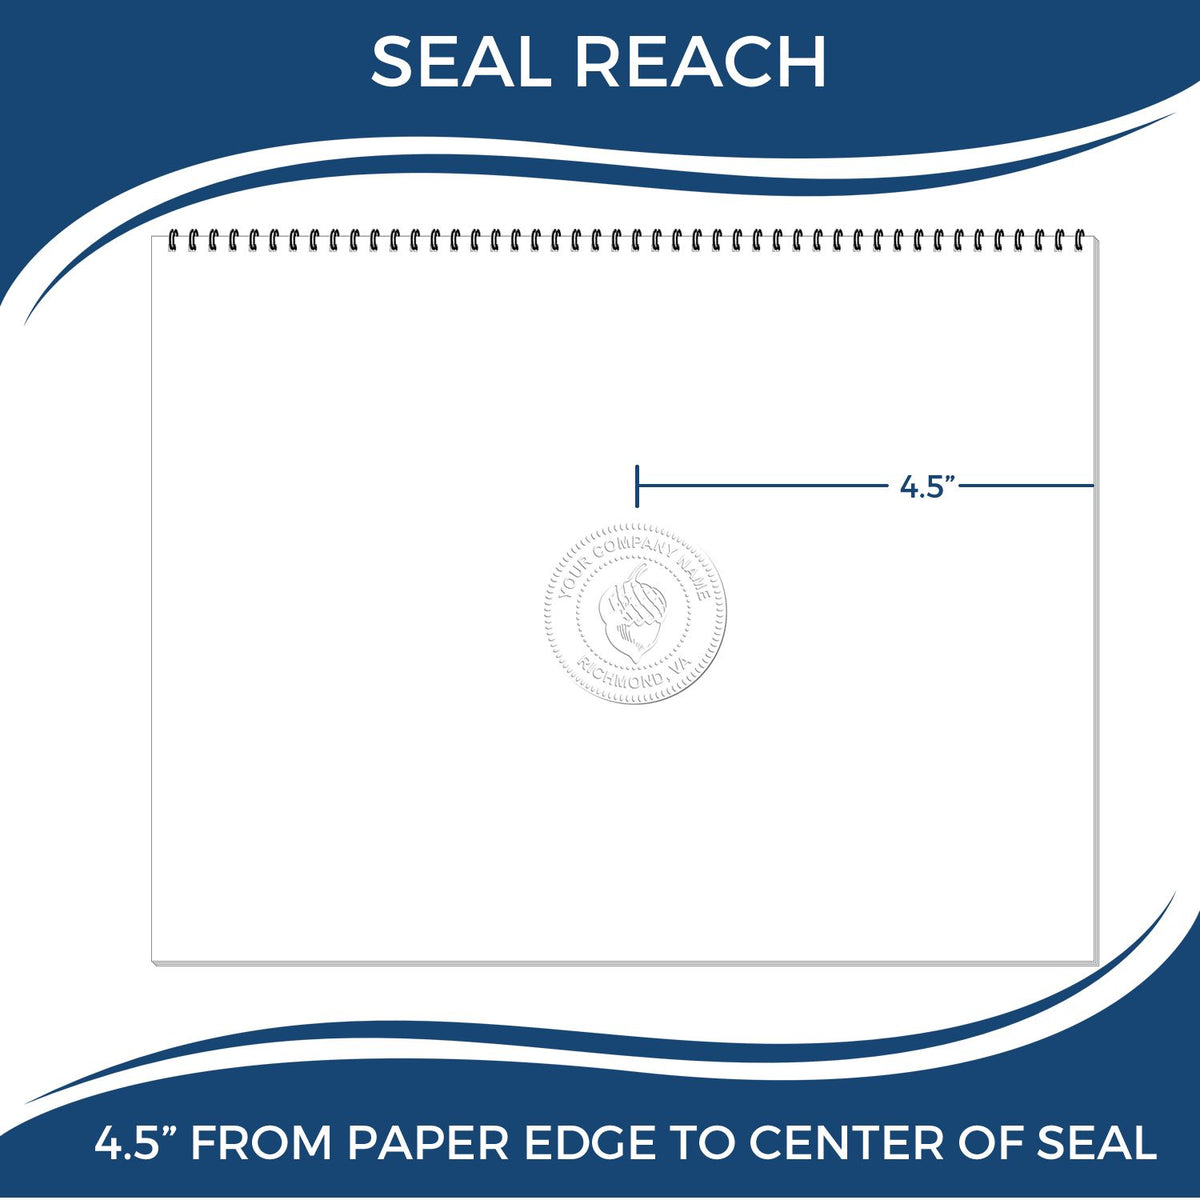 An infographic showing the seal reach which is represented by a ruler and a miniature seal image of the State of New Hampshire Extended Long Reach Geologist Seal